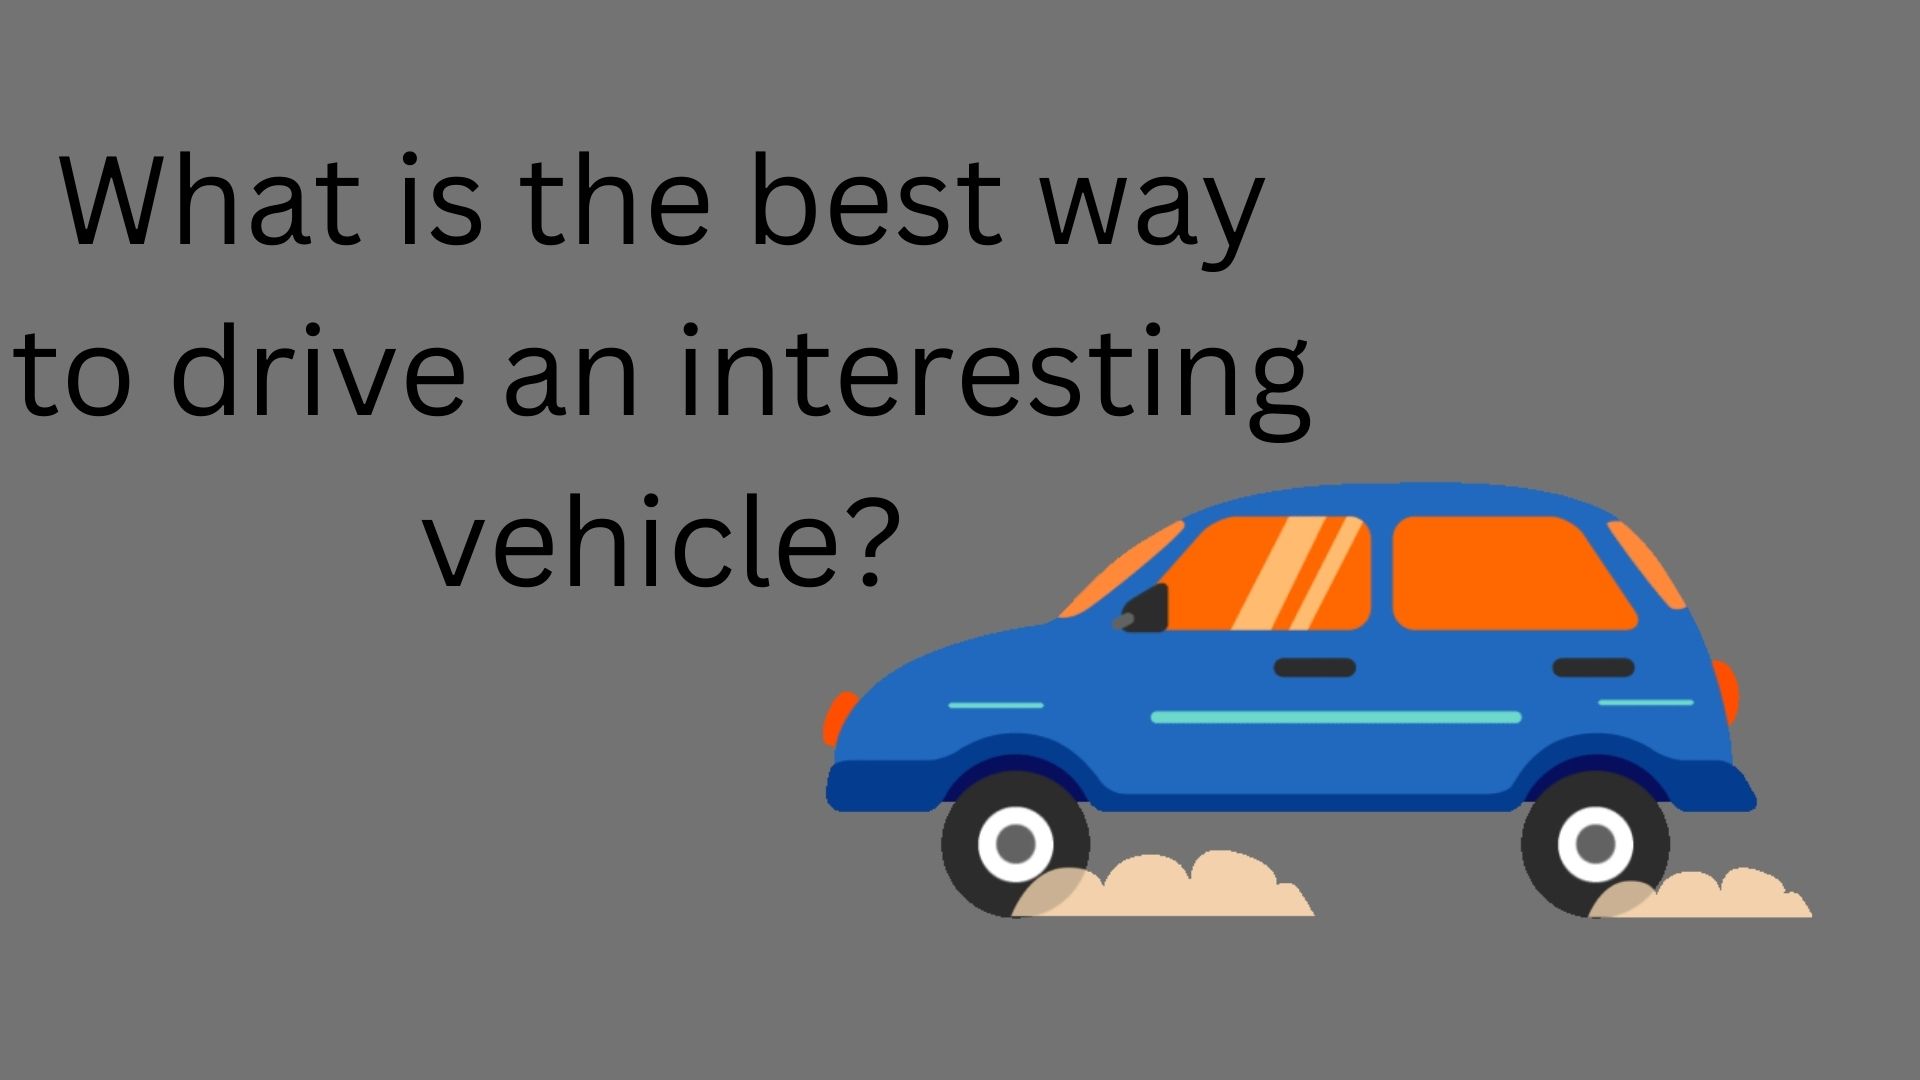 What is the best way to drive an interesting vehicle